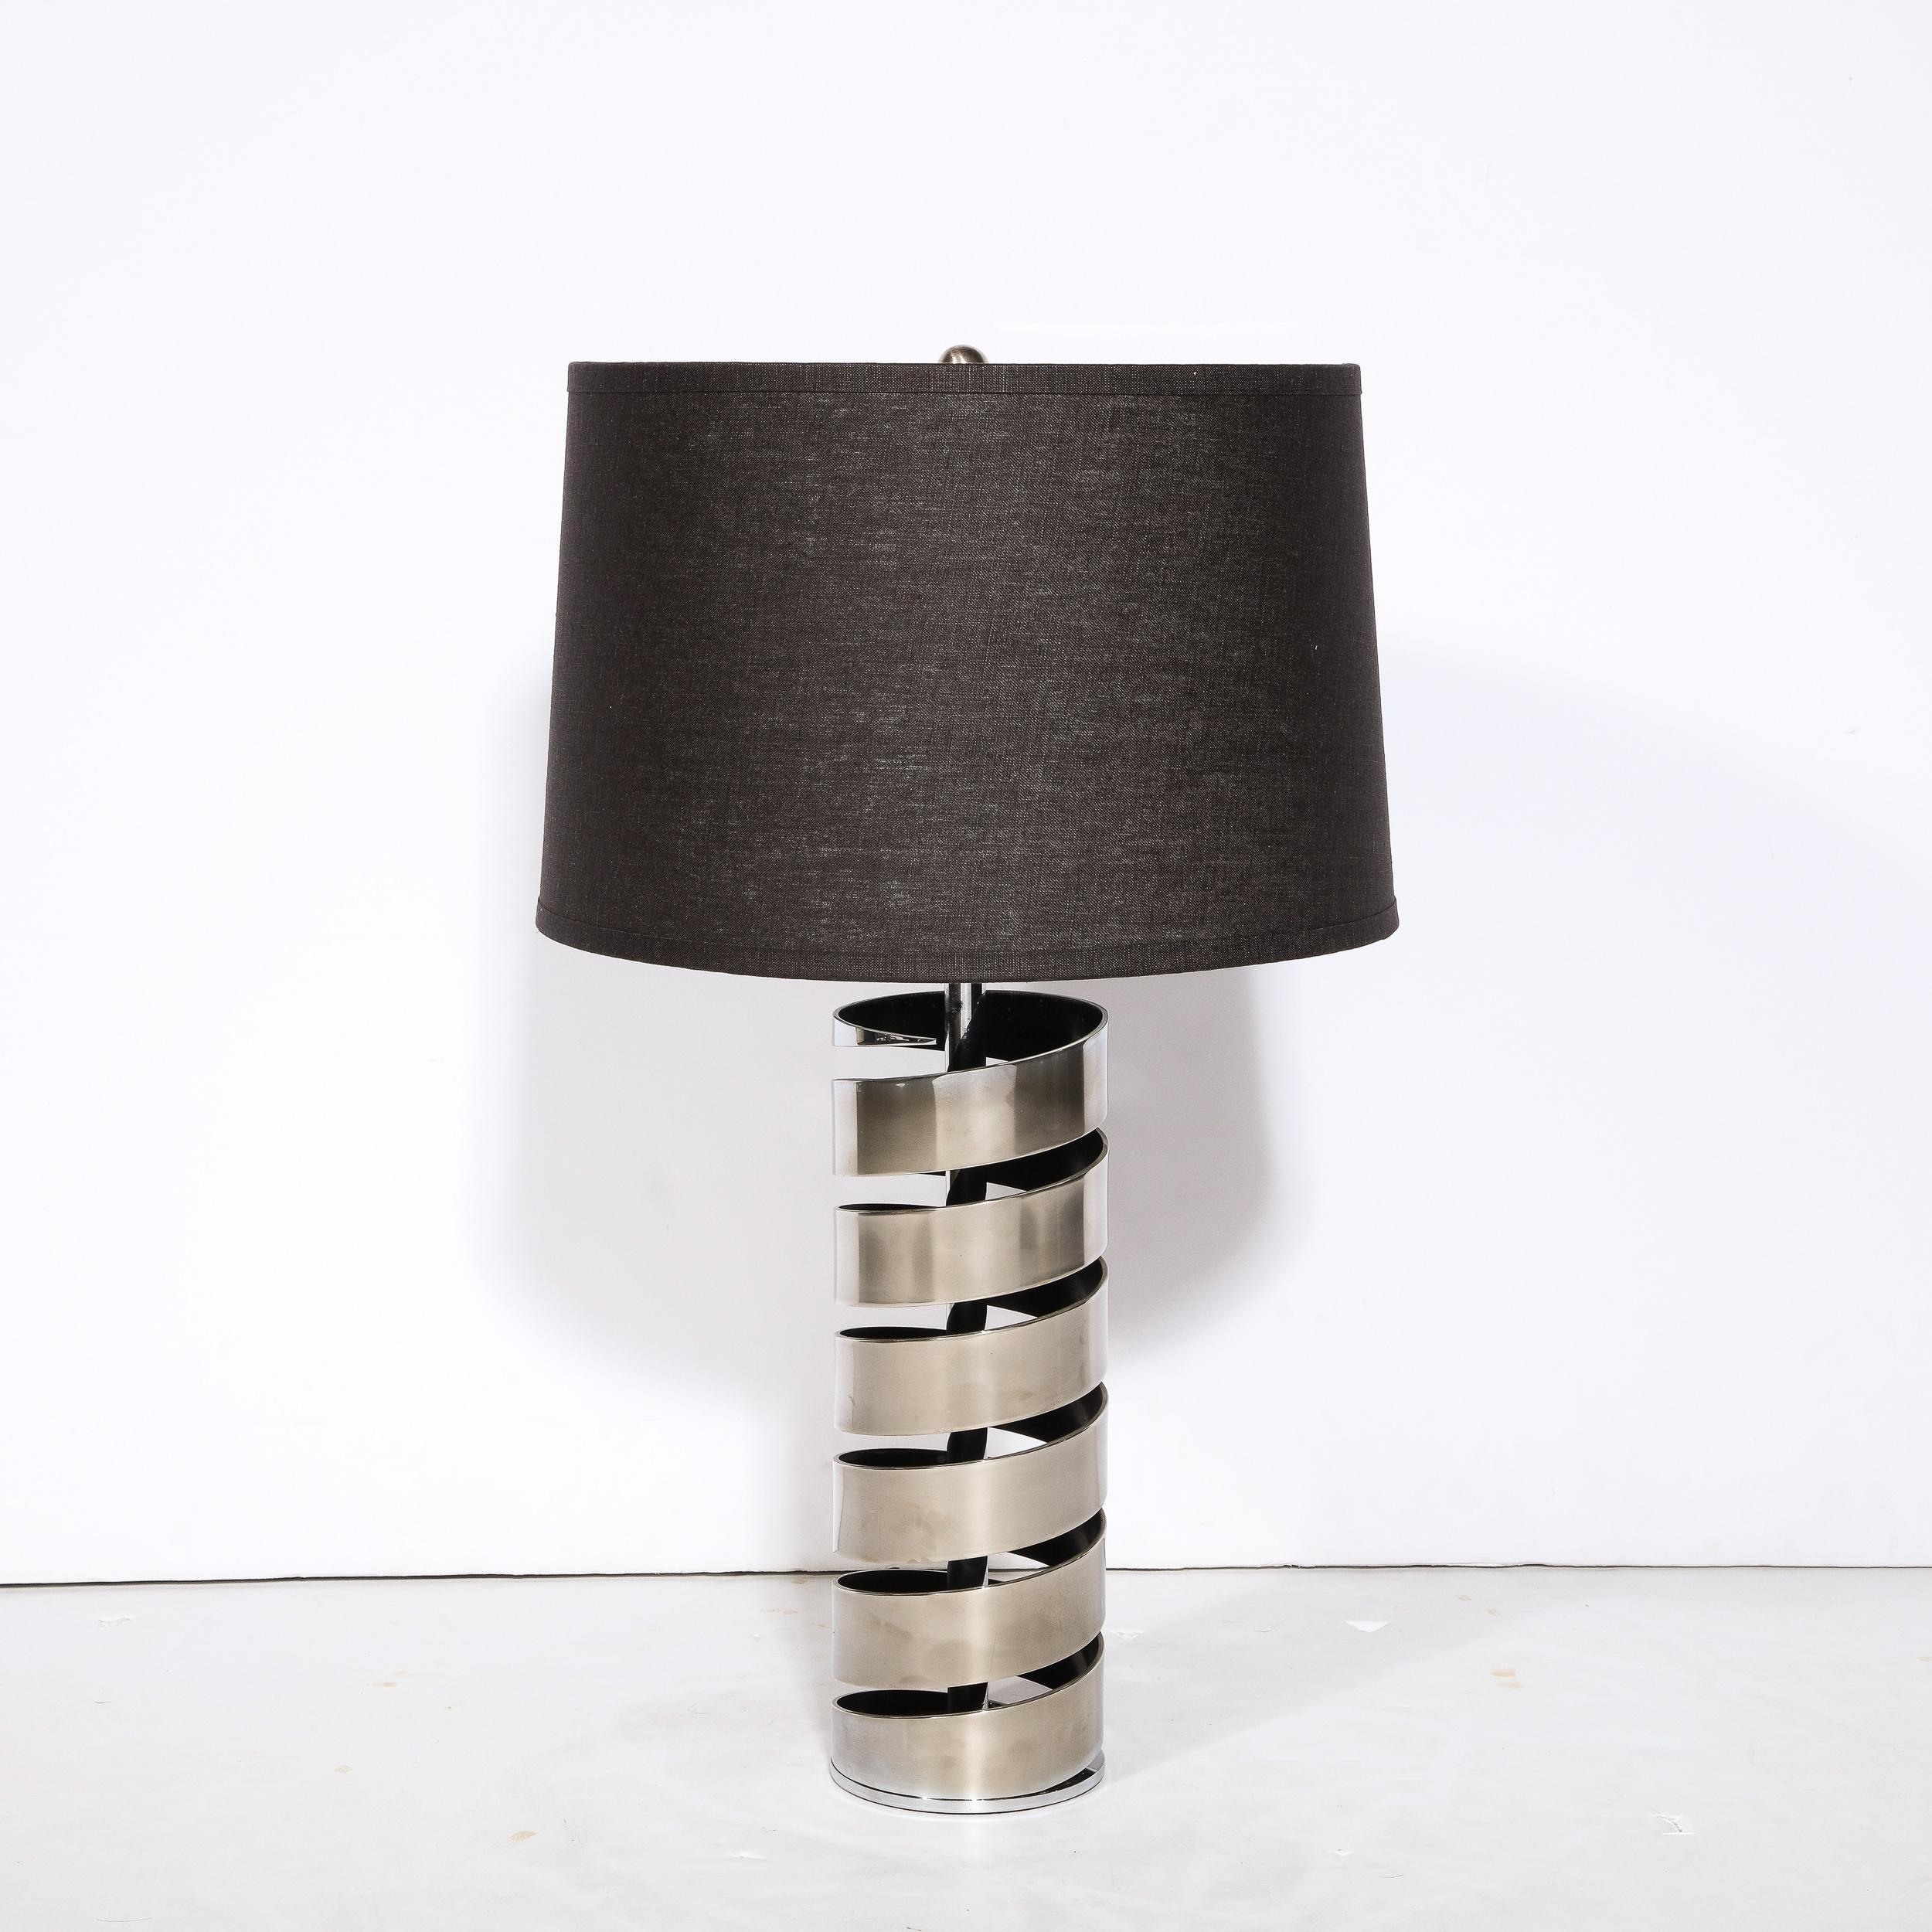 Modernist Torqued Spiral Form Table Lamp in Satin Nickel In Excellent Condition For Sale In New York, NY